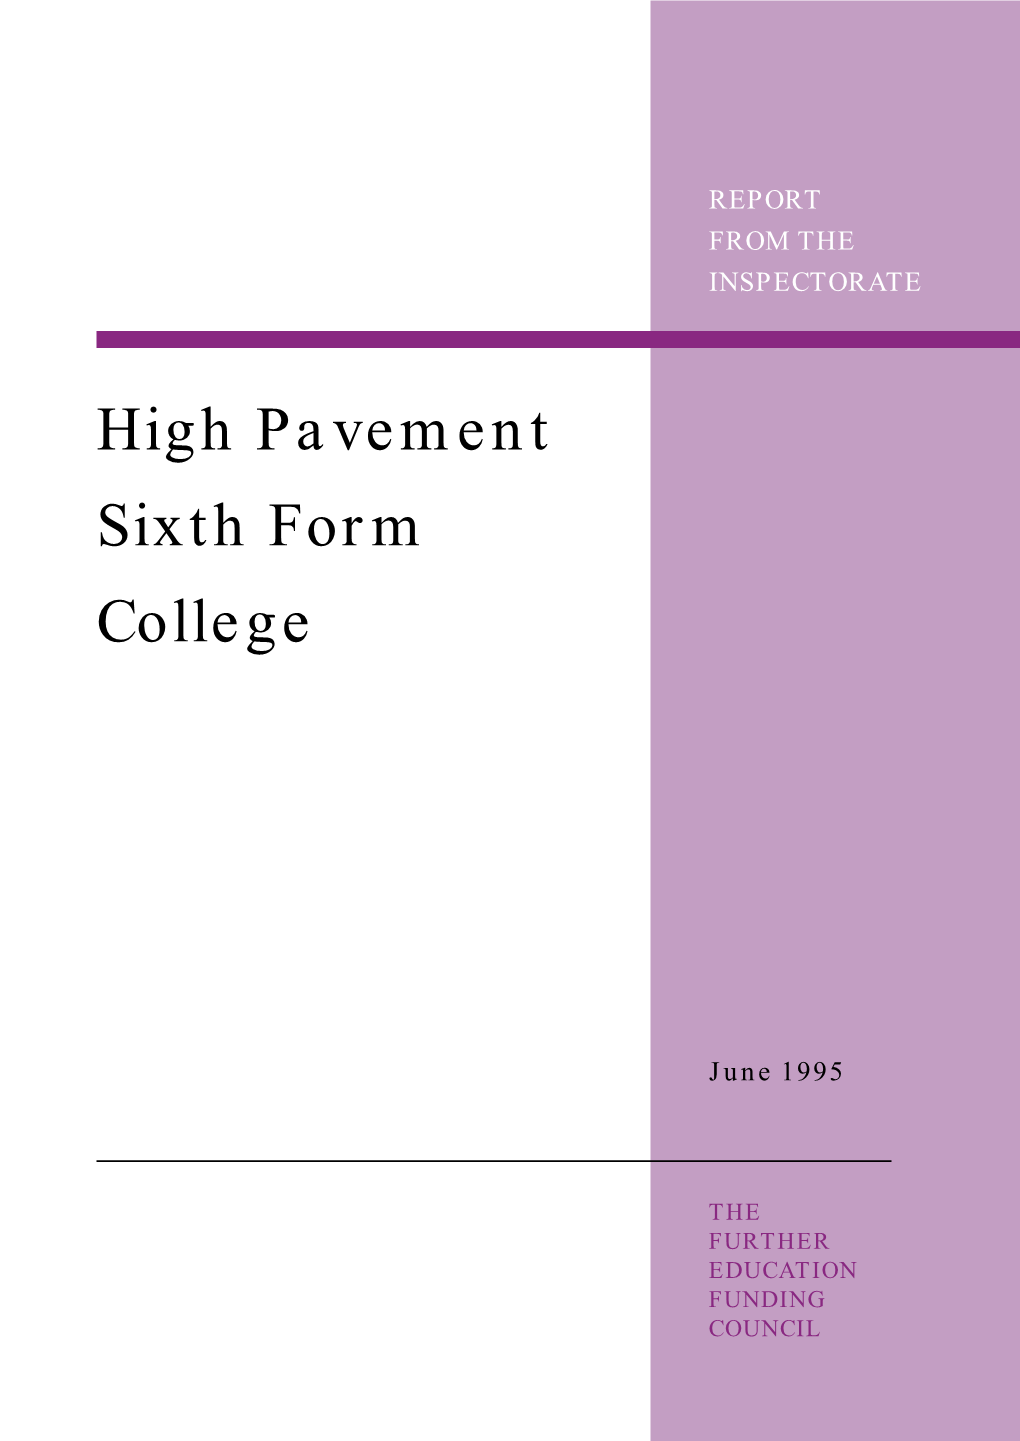 High Pavement Sixth Form College